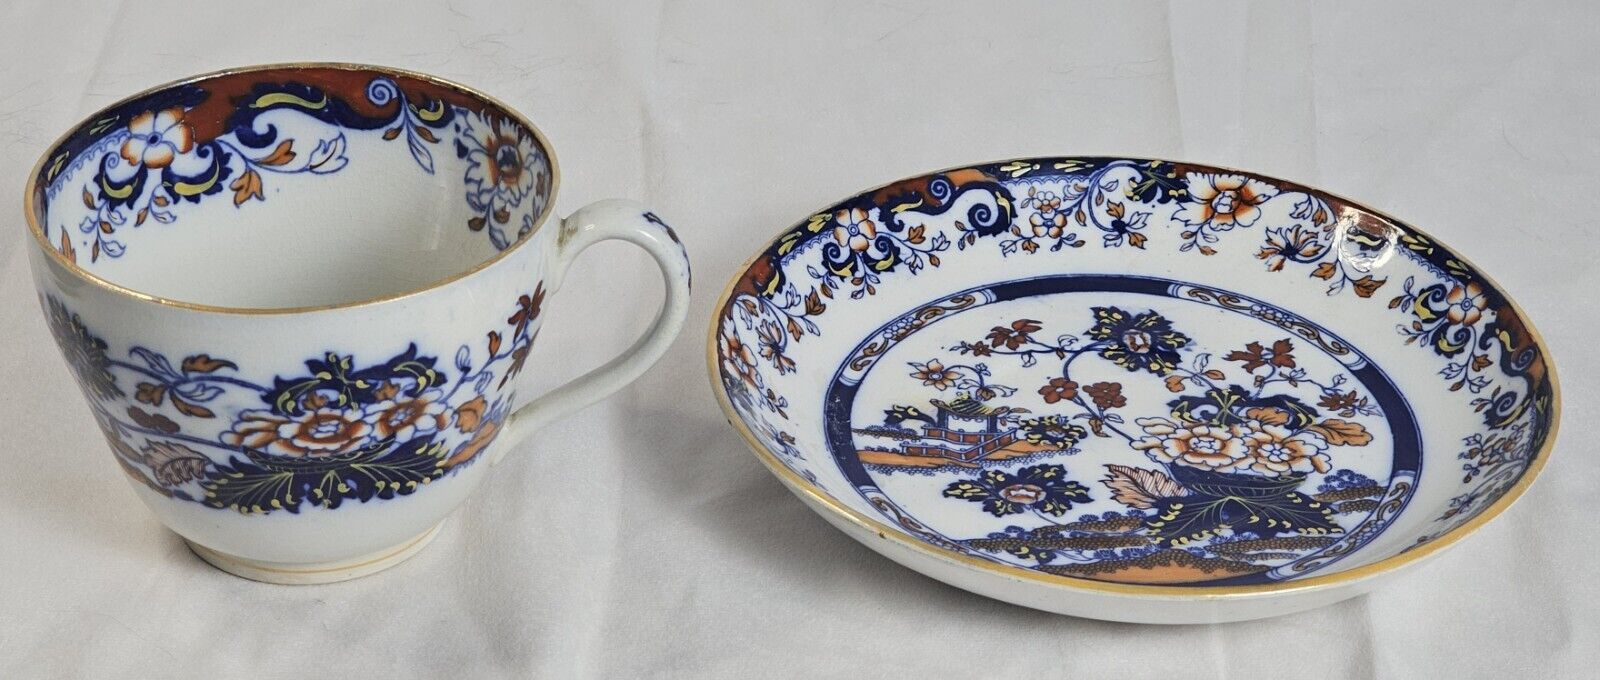 Mintons Flow Blue Amherst Japan Cup and Dinner Plate c. 1850s